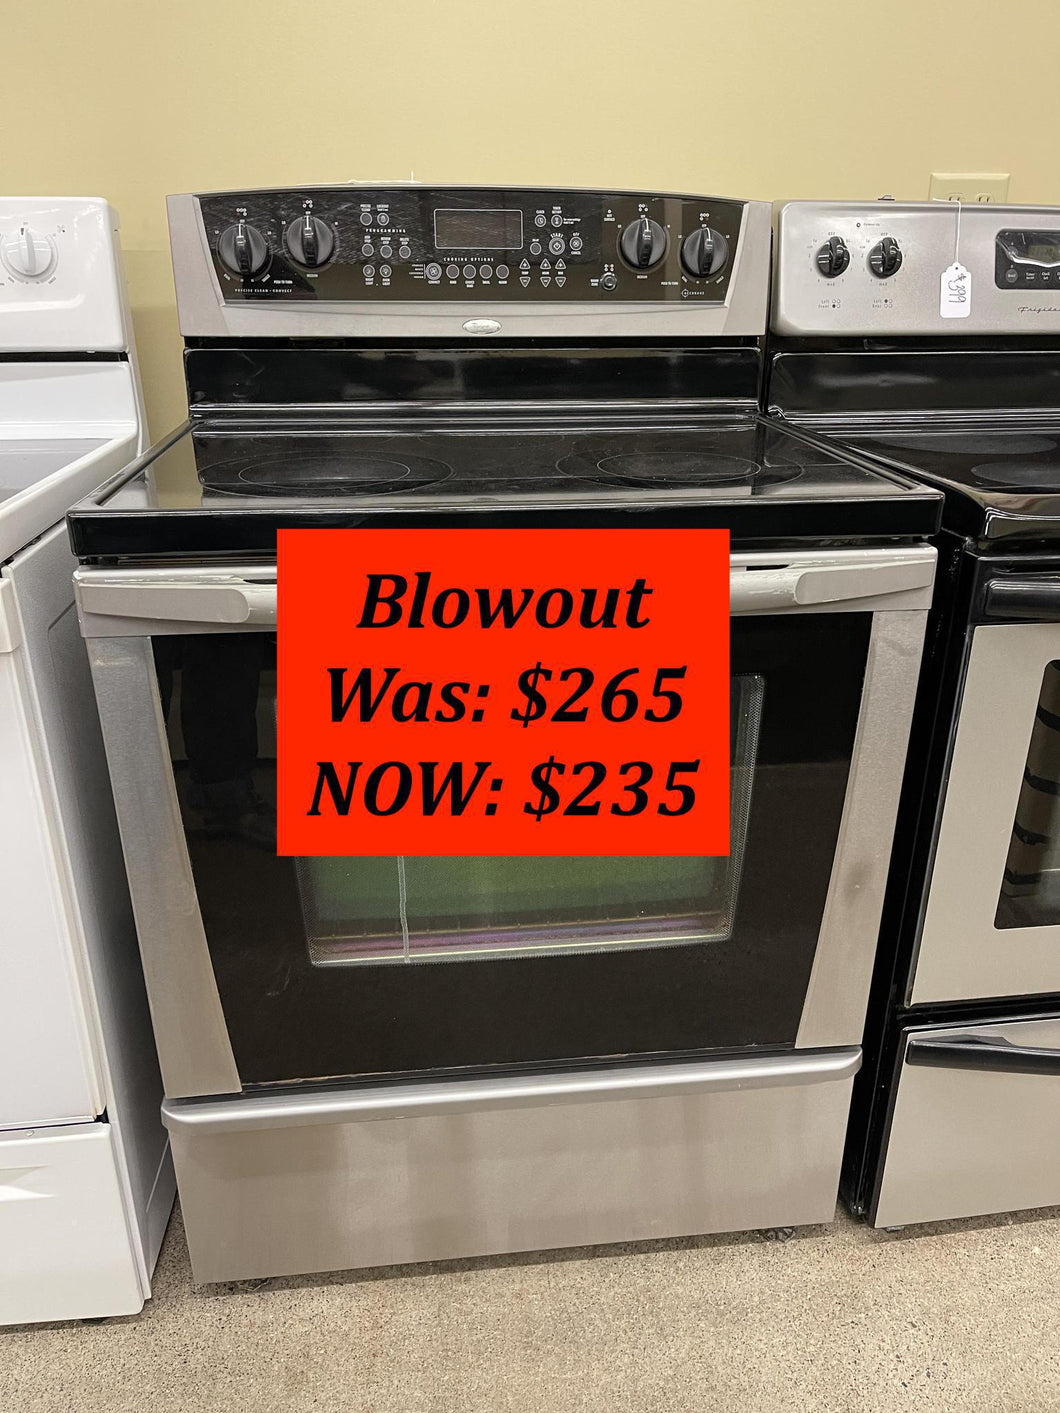 Whirlpool Stainless Electric Stove - 4859